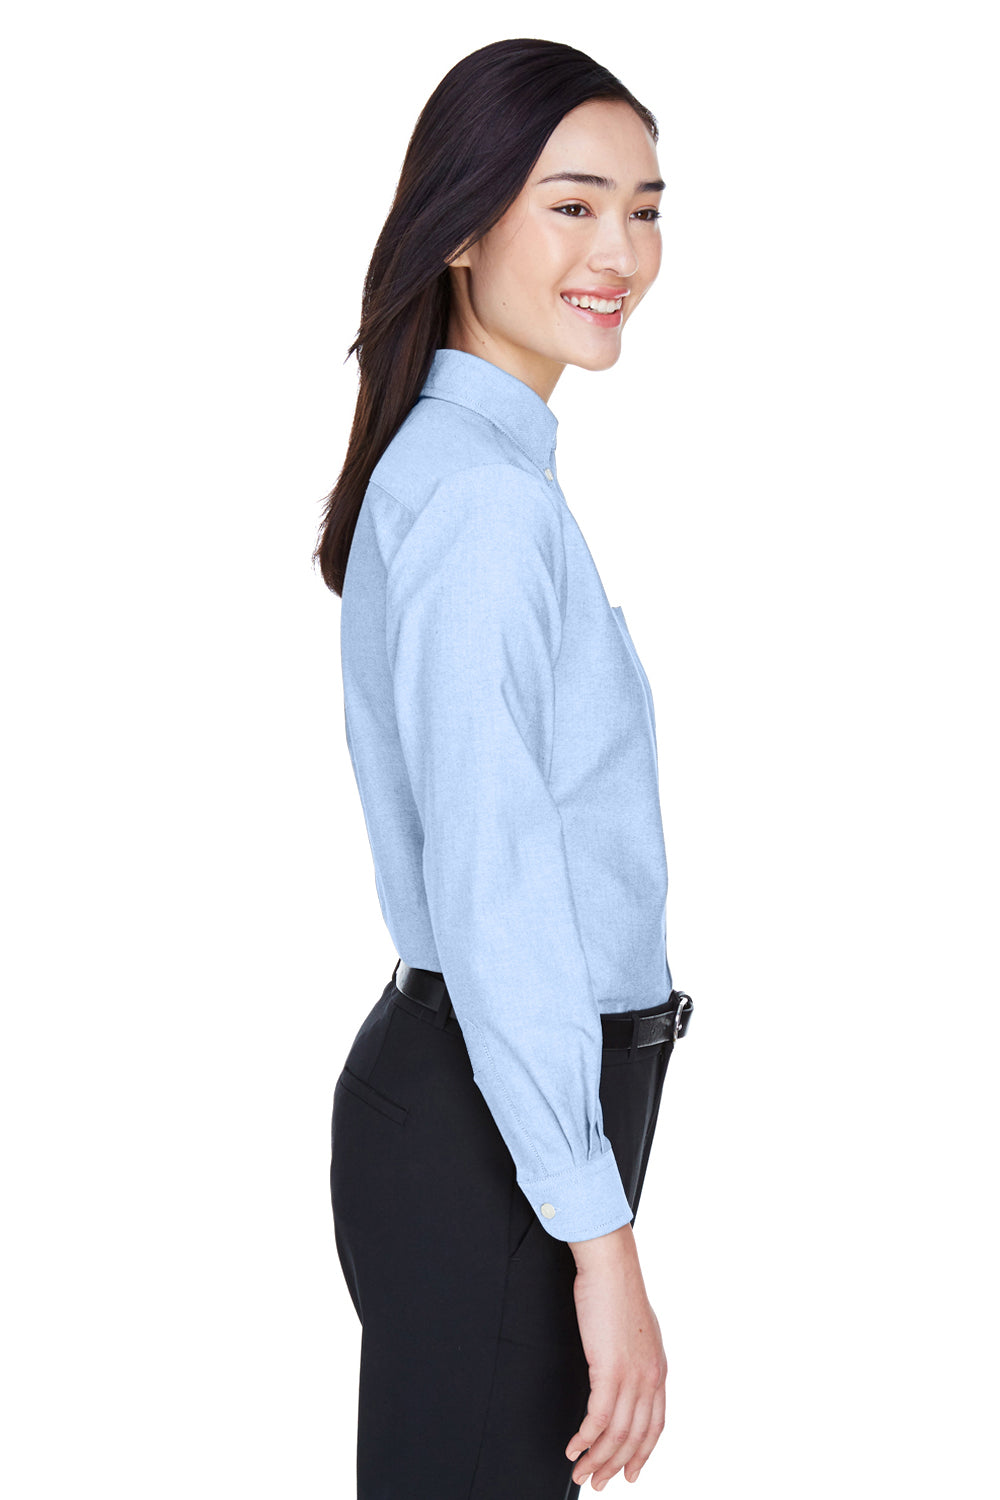 UltraClub 8990 Womens Classic Oxford Wrinkle Resistant Long Sleeve Button Down Shirt w/ Pocket Light Blue Side